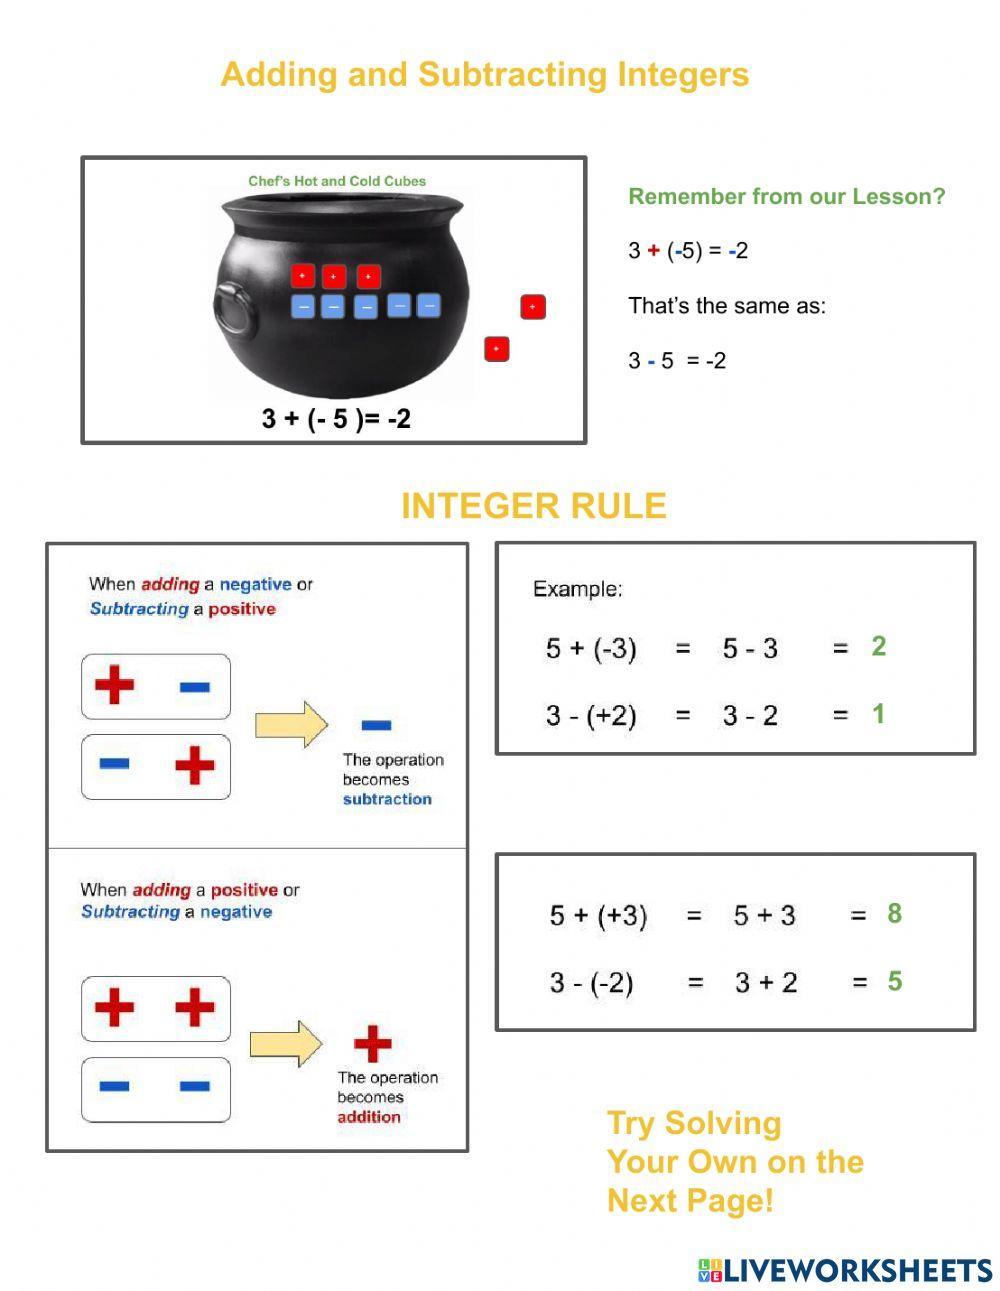 Adding and Subtracting Integers 2 : Integer Rule